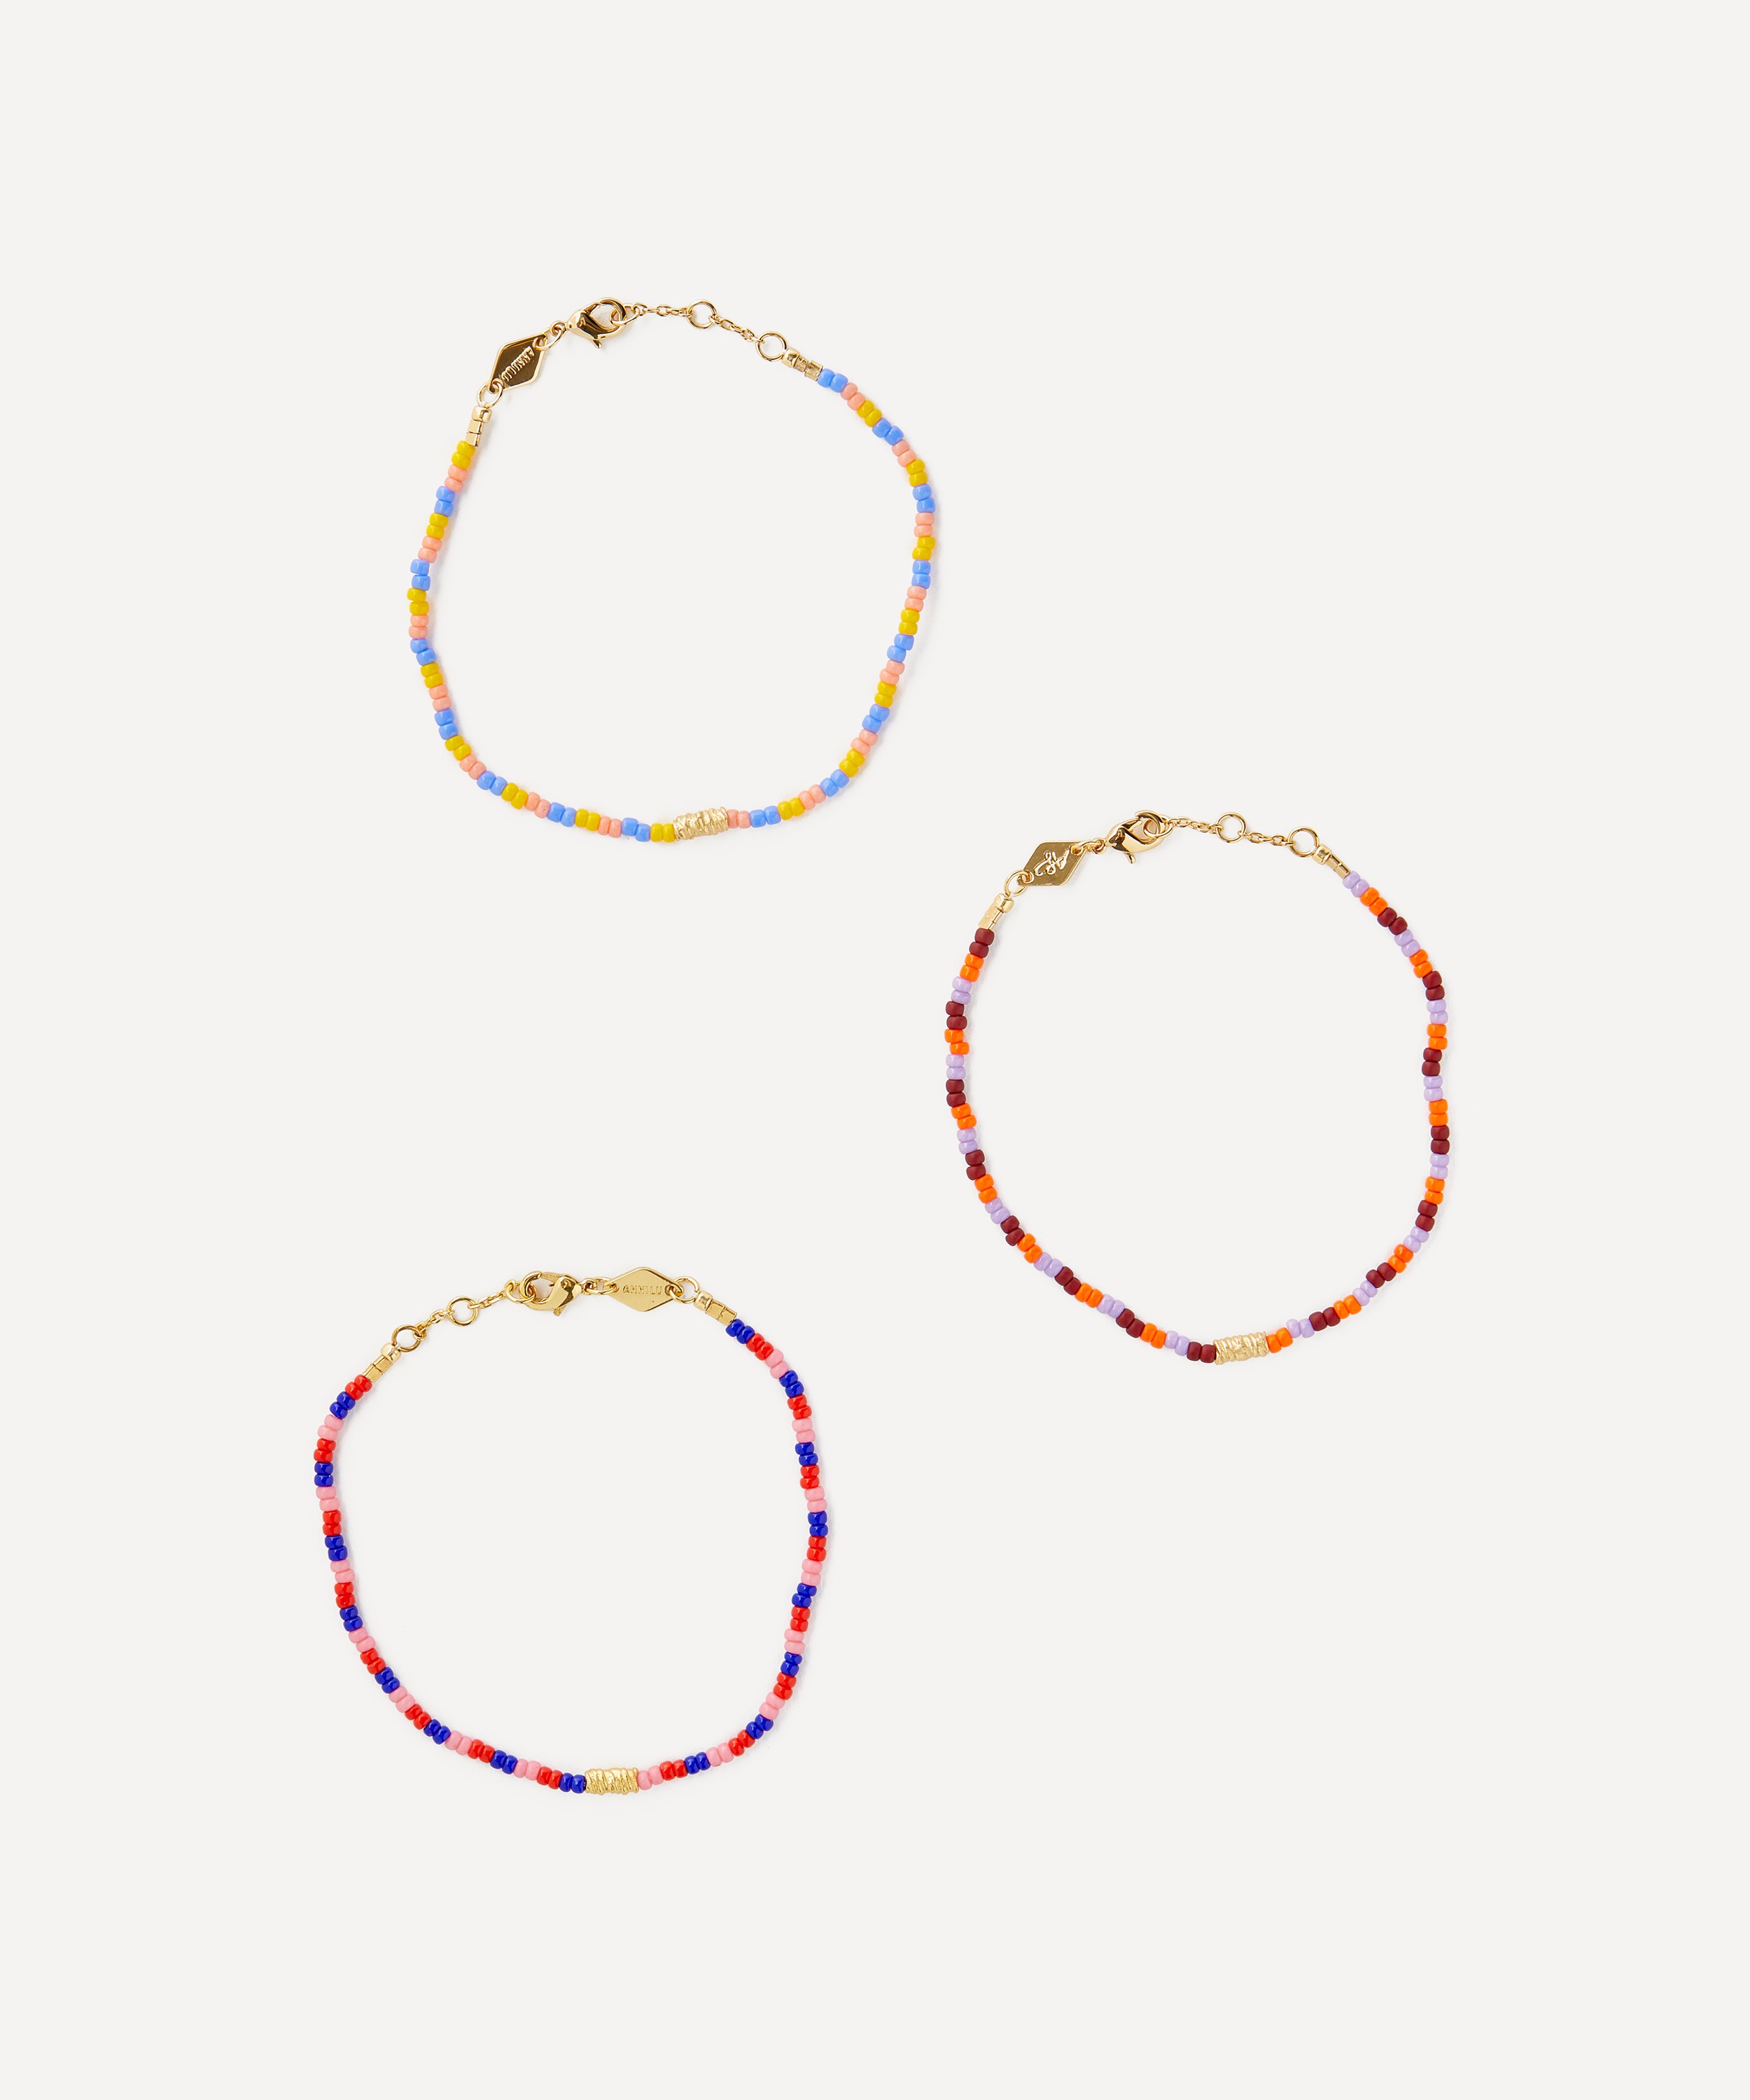 ANNI LU - 18ct Gold-Plated Paradiso Lemon Lobster and Paradiso Cherry Candy Bracelet Set of Two